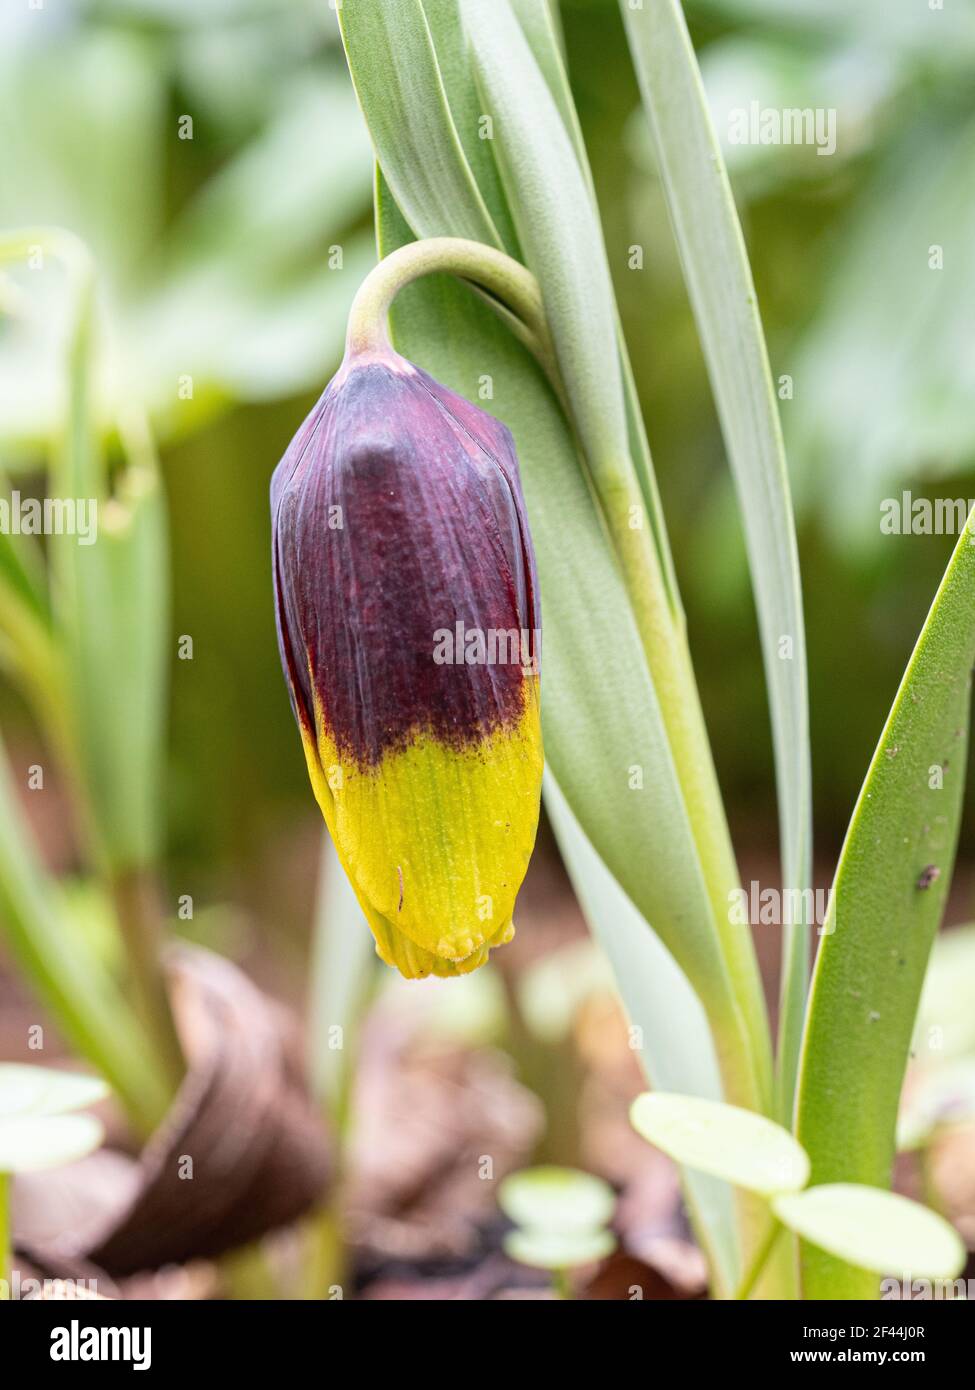 A close up of a single brown and yellow flower of Fritillaria michailovskyi Stock Photo